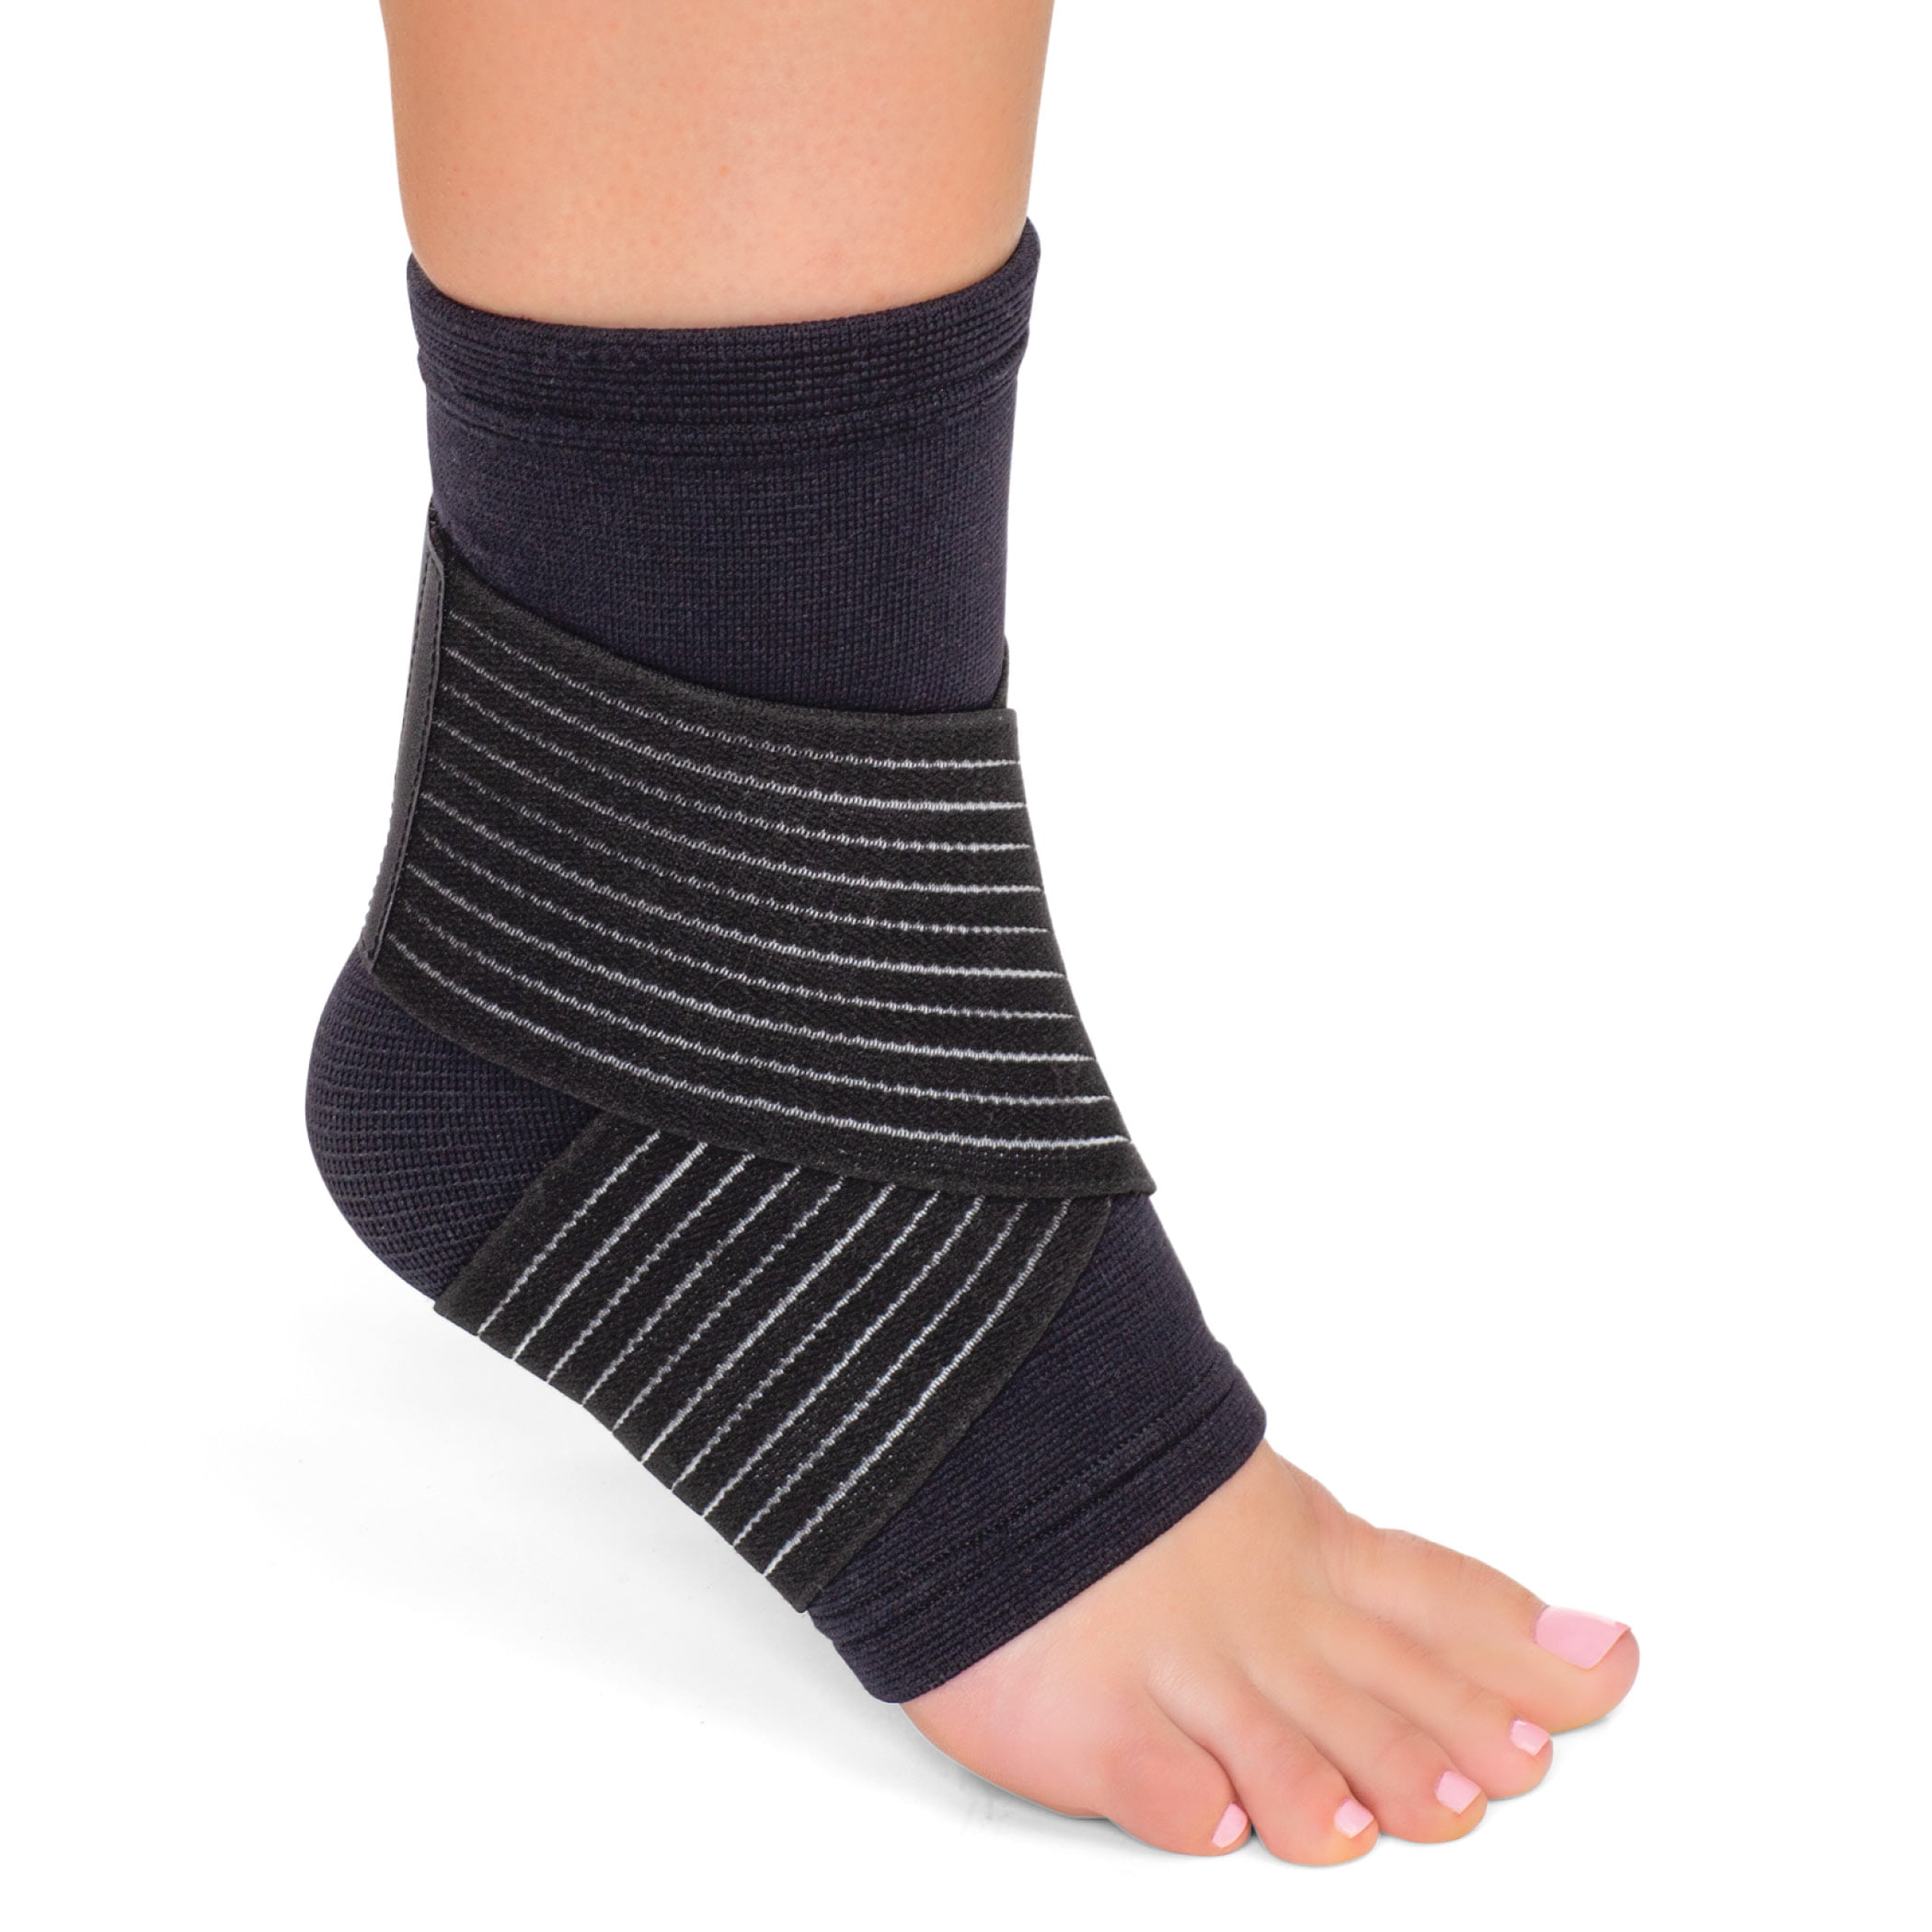 Therapeutic 2Piece Ankle Support Compression Wrap Reduces Swelling